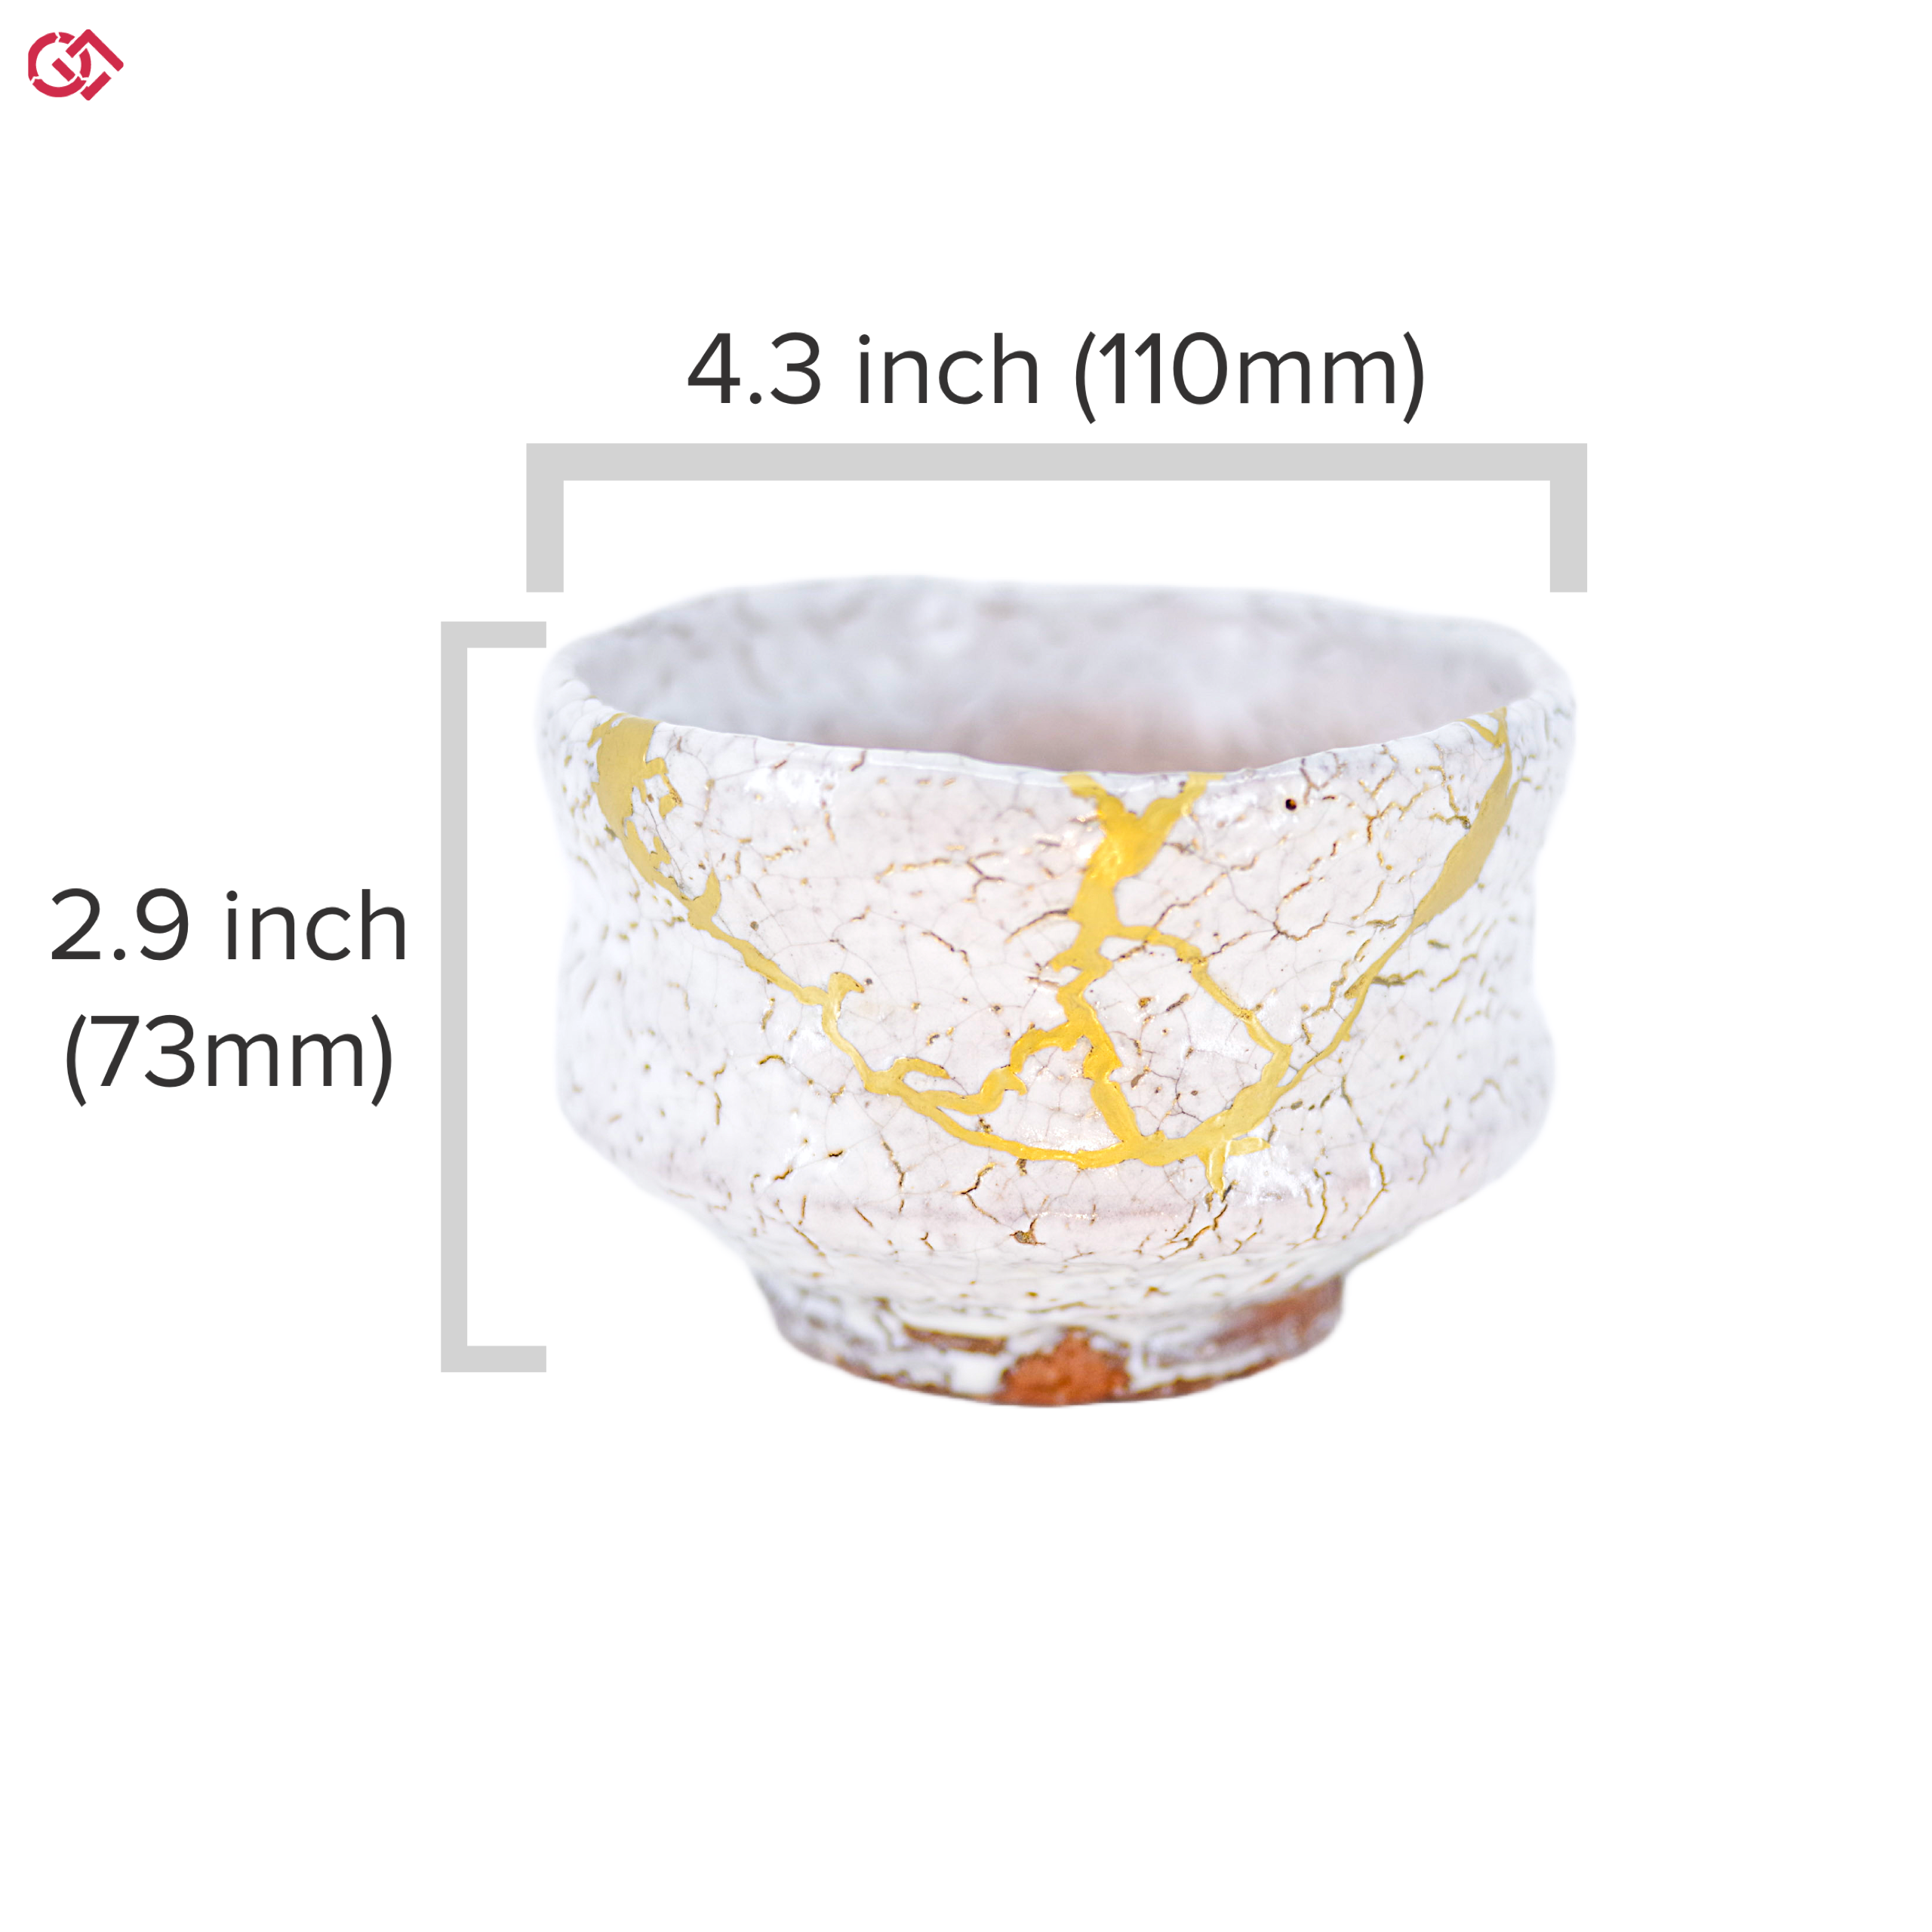 Authentic Kintsugi pottery with diameter and height description